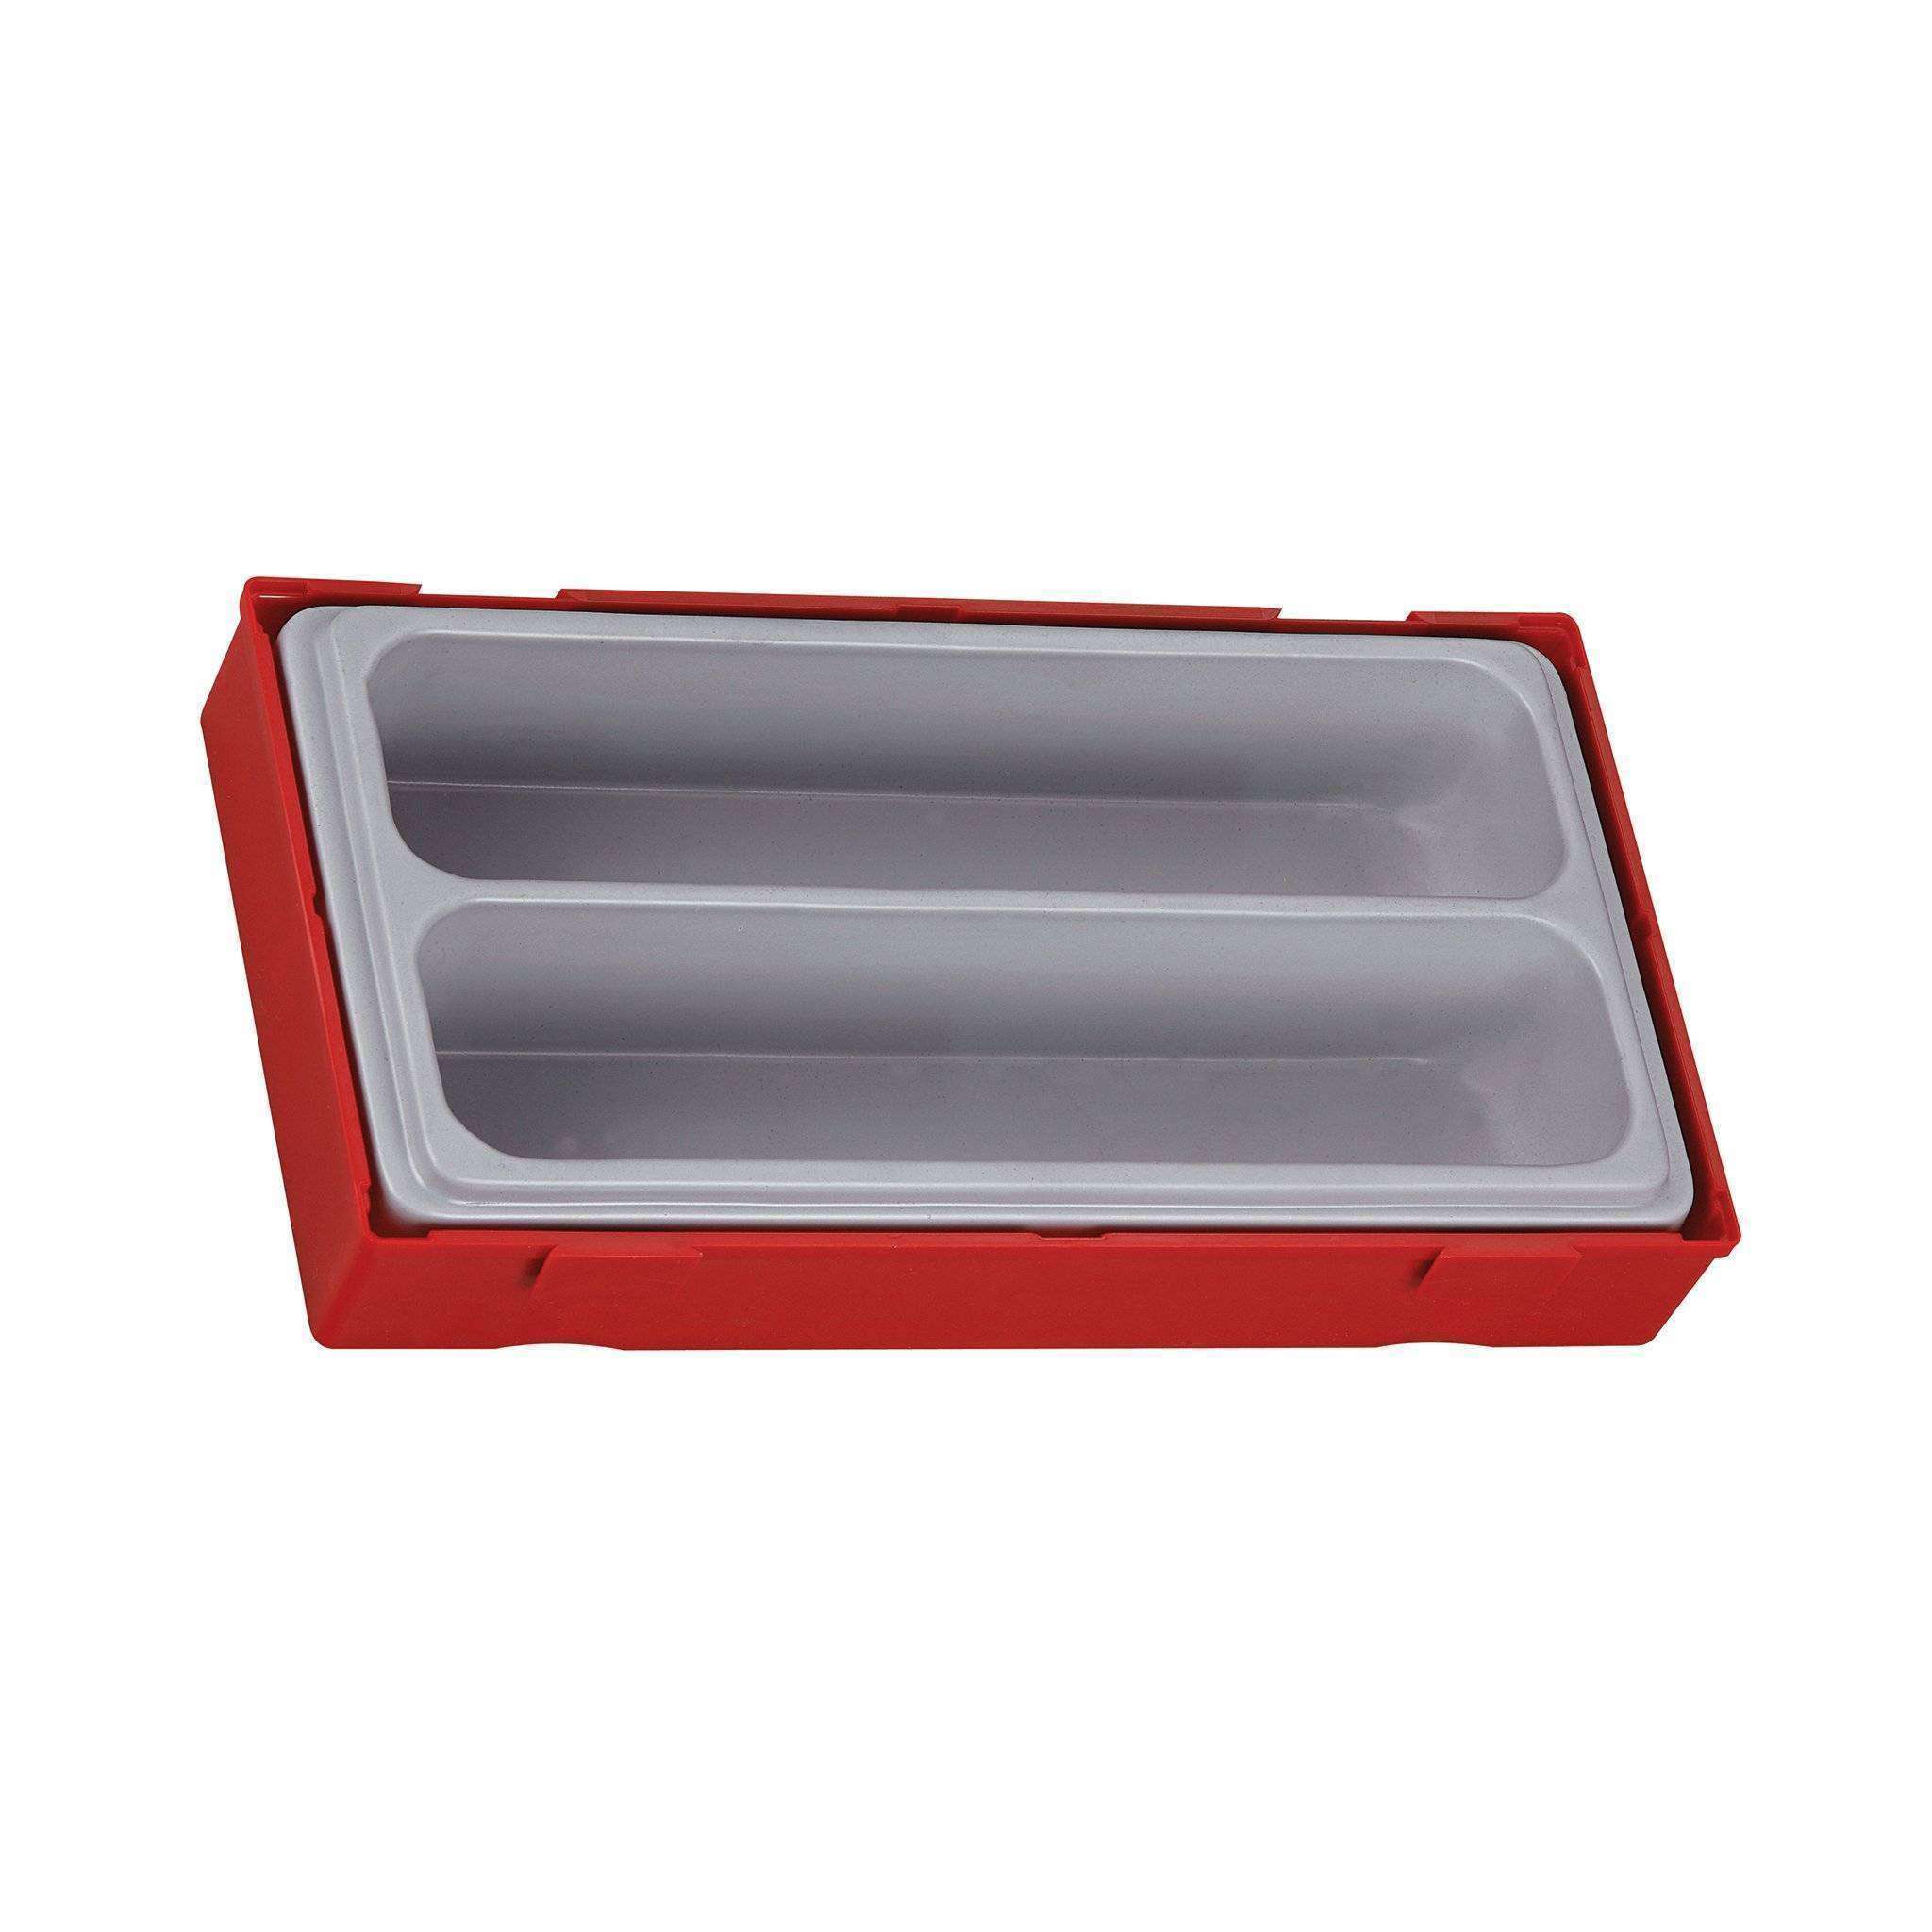 Teng Tools Empty Storage Tray With 2 Compartments - TT02